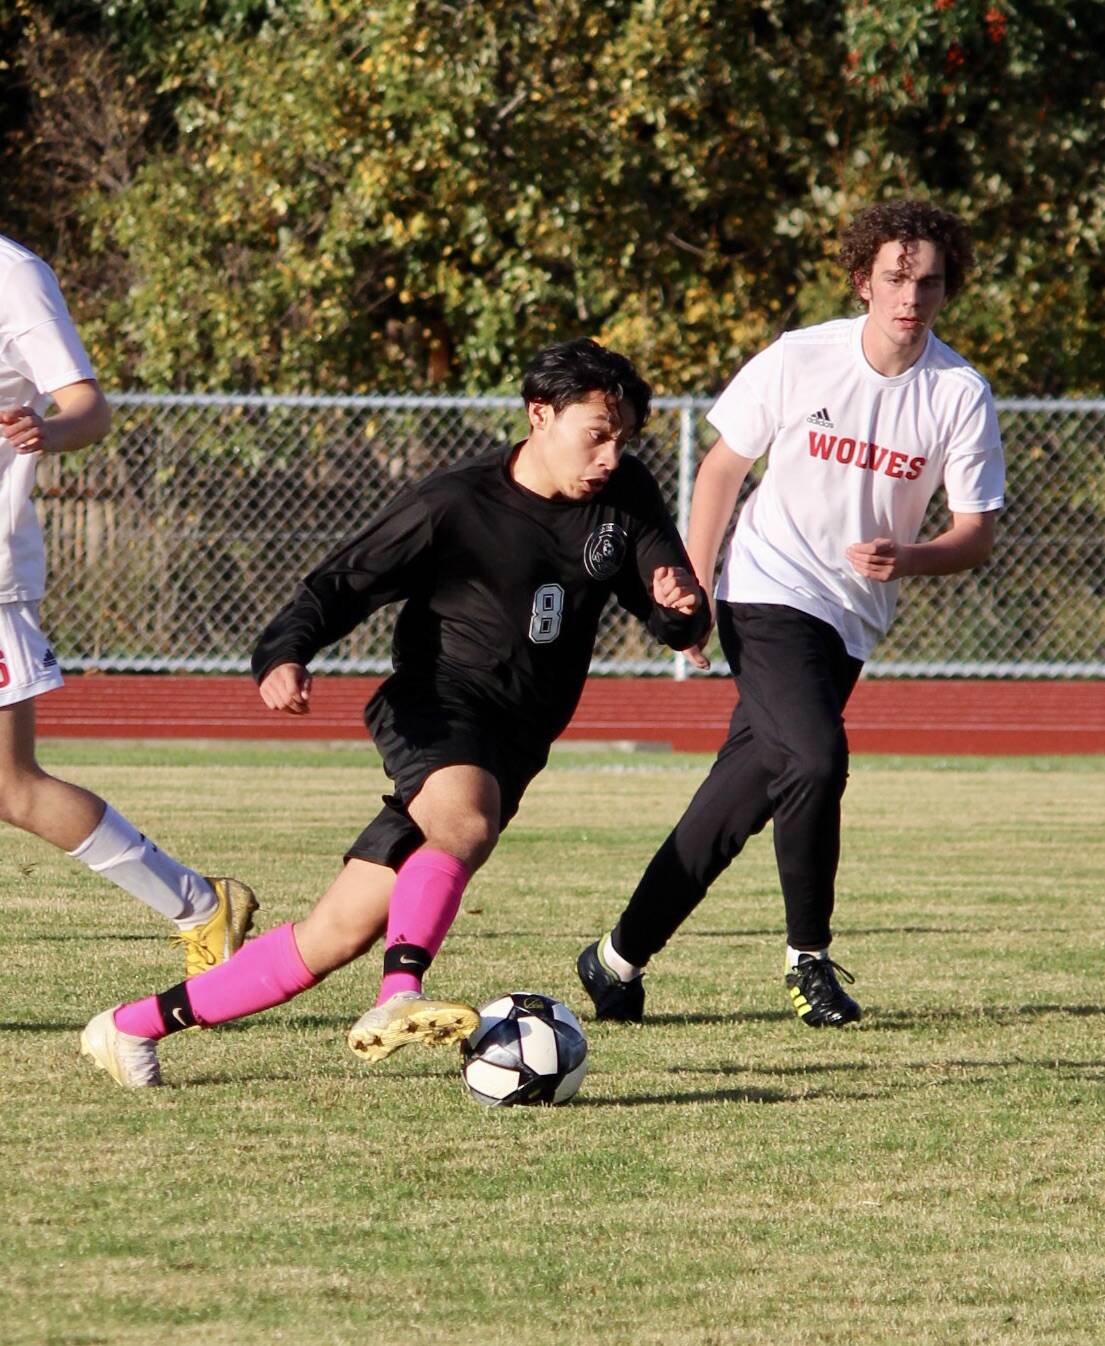 Corey Wiscomb photo
Slashing his way to center field on the attack is Senior William Ibarra.